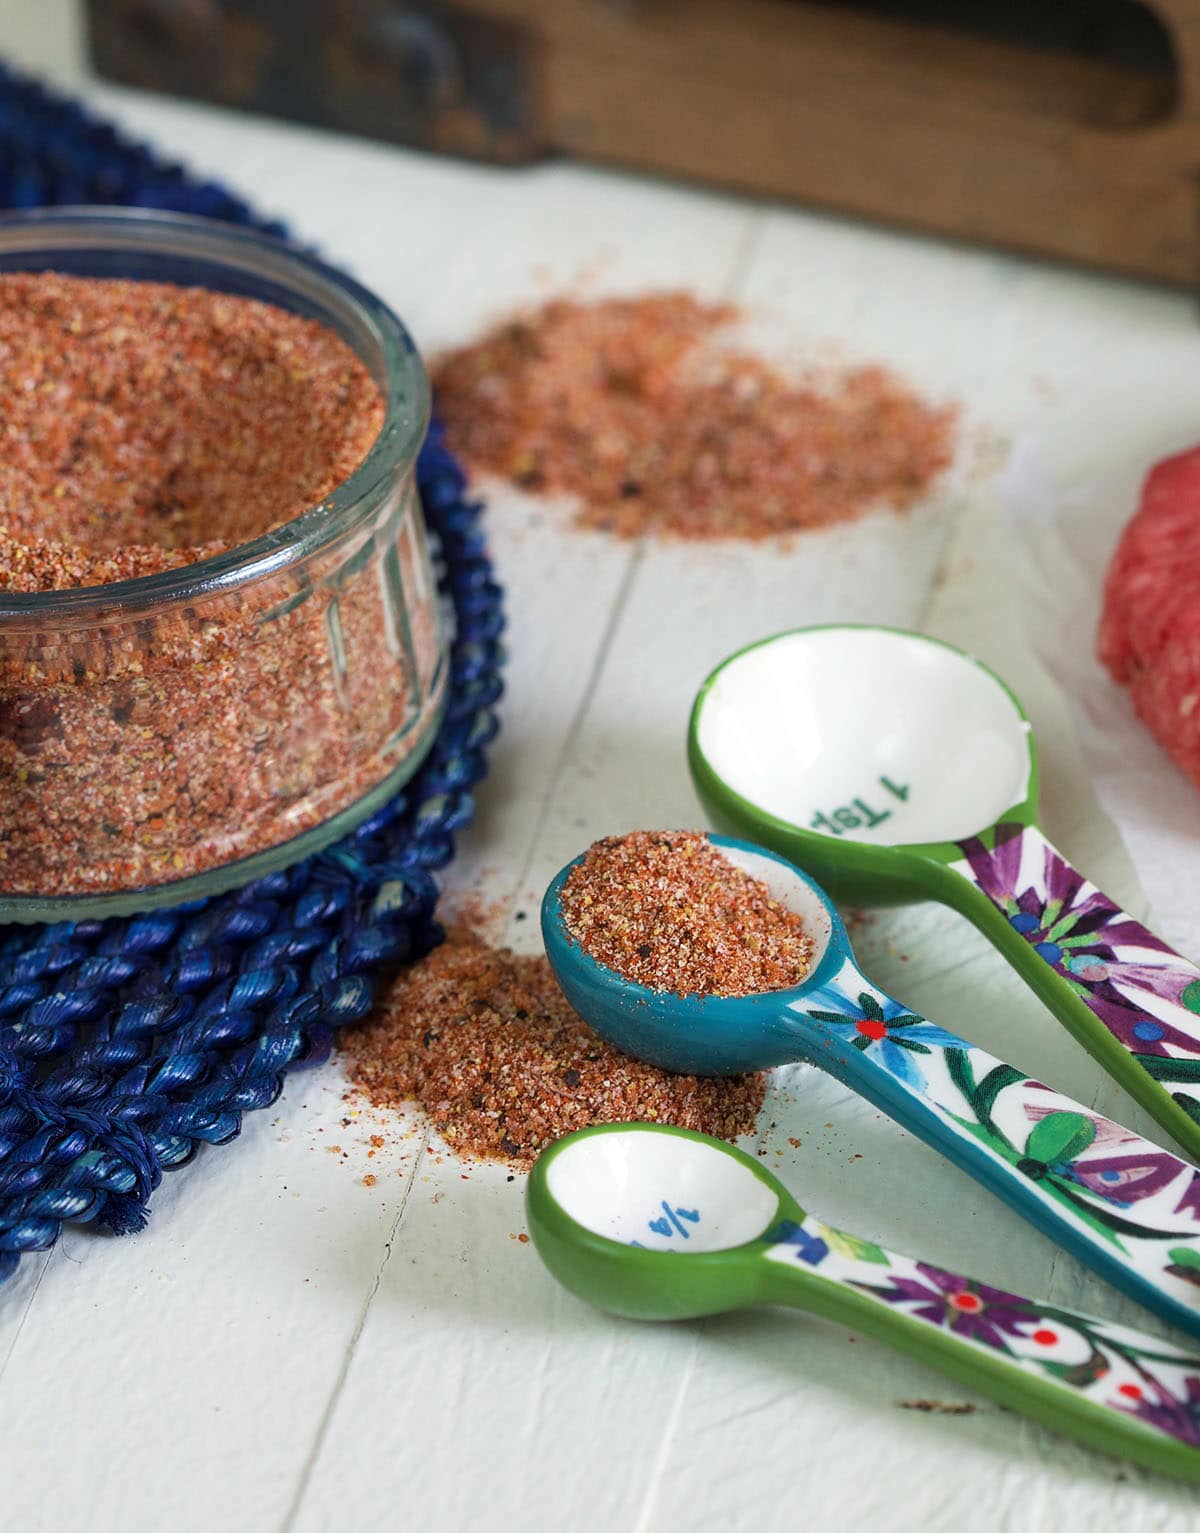 Small measuring spoons are placed next to a jar of seasoning.